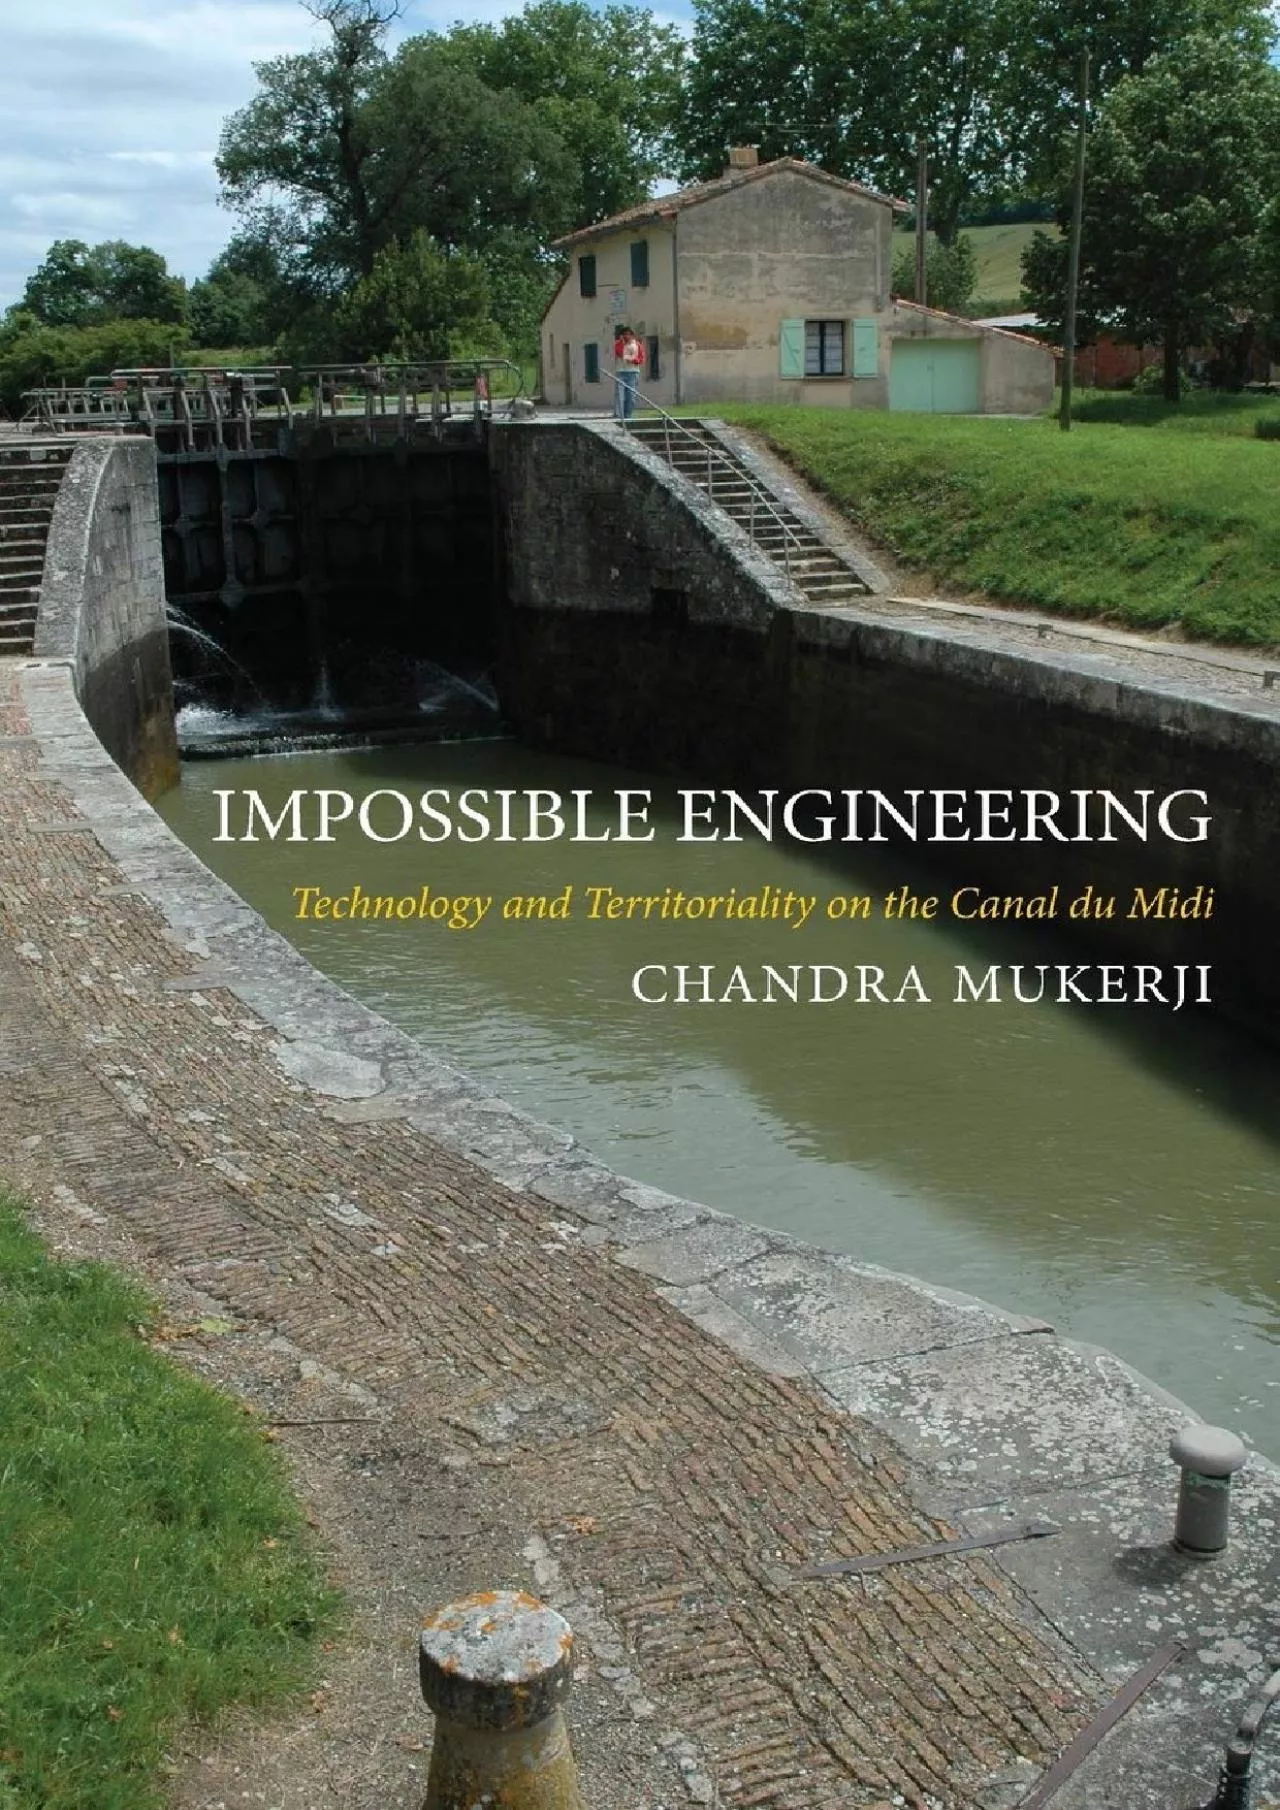 [BOOK]-Impossible Engineering: Technology and Territoriality on the Canal du Midi (Princeton